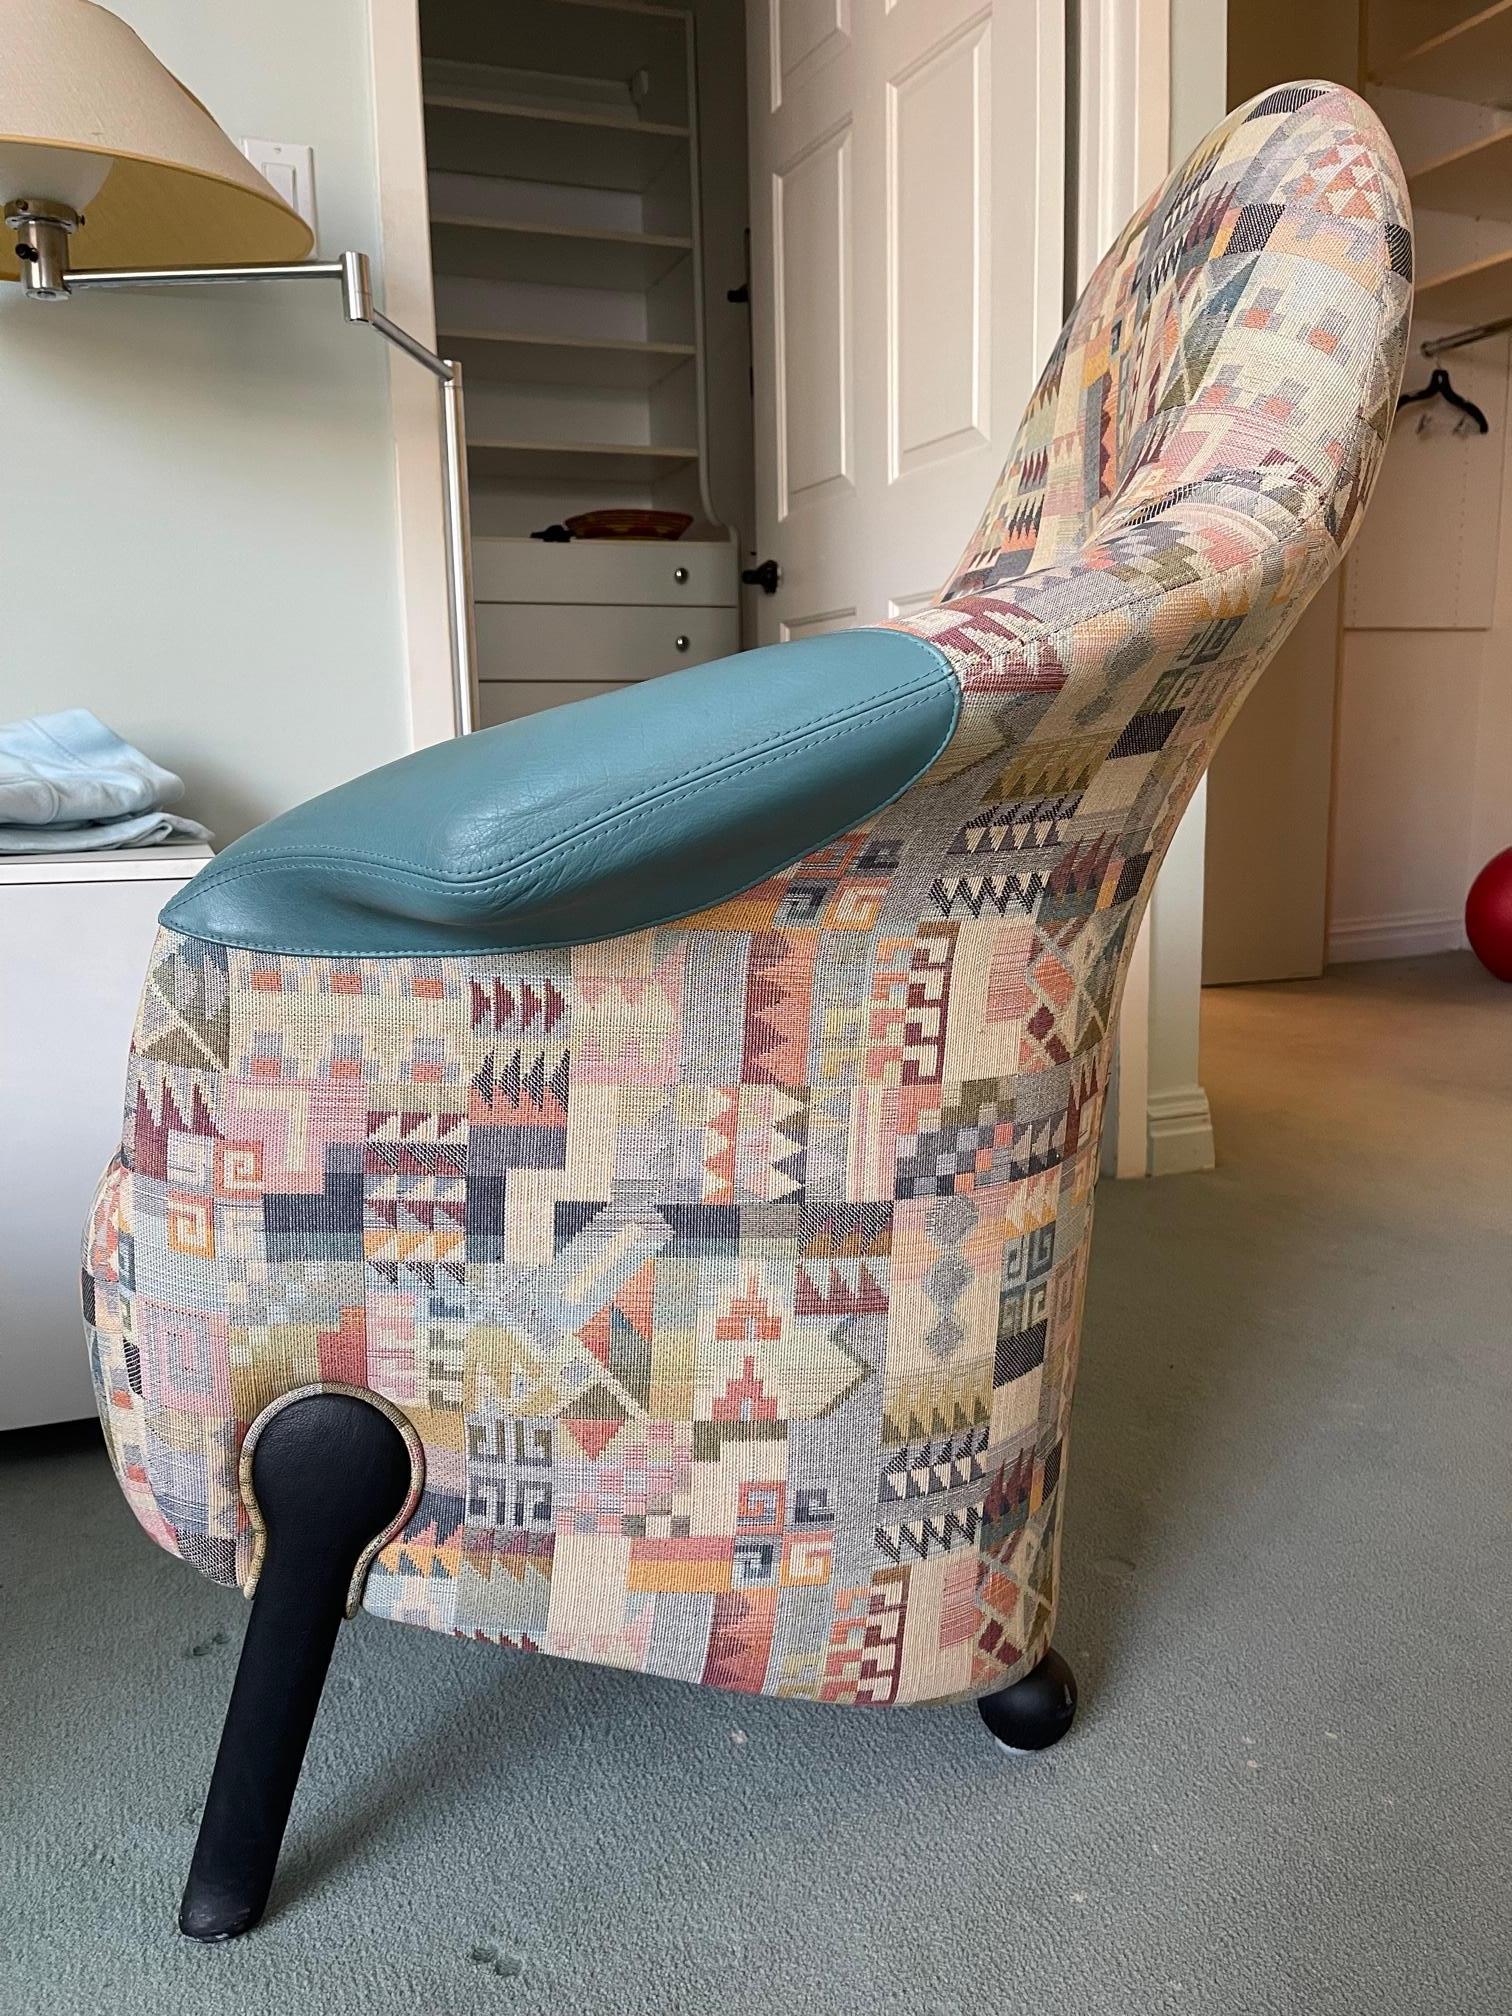 Original Missoni leather and fabric relax chair and ottoman designed by Franz Wittmann. This chair is an Austrian design and made in 1970s.  The back legs of the chair have a round shape, these are different from the two front legs. Light blue can